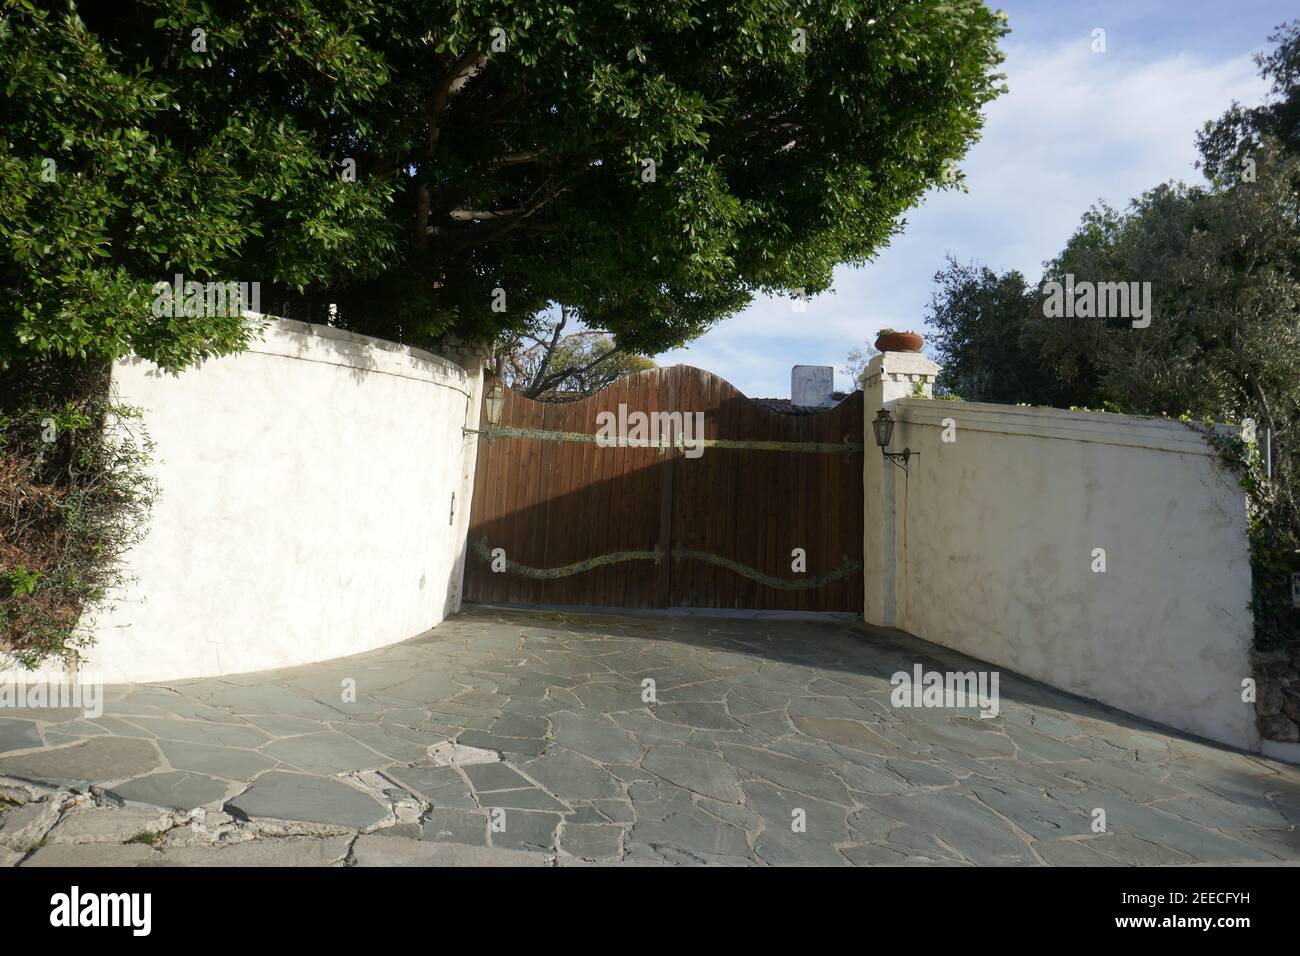 Los Angeles California, USA 14th February 2021 A general view of atmosphere of actor/director Clint Eastwood's home/house on February 14, 2021 in Bel Air, Los Angeles, California, USA. Photo by Barry King/Alamy Stock Photo Stock Photo